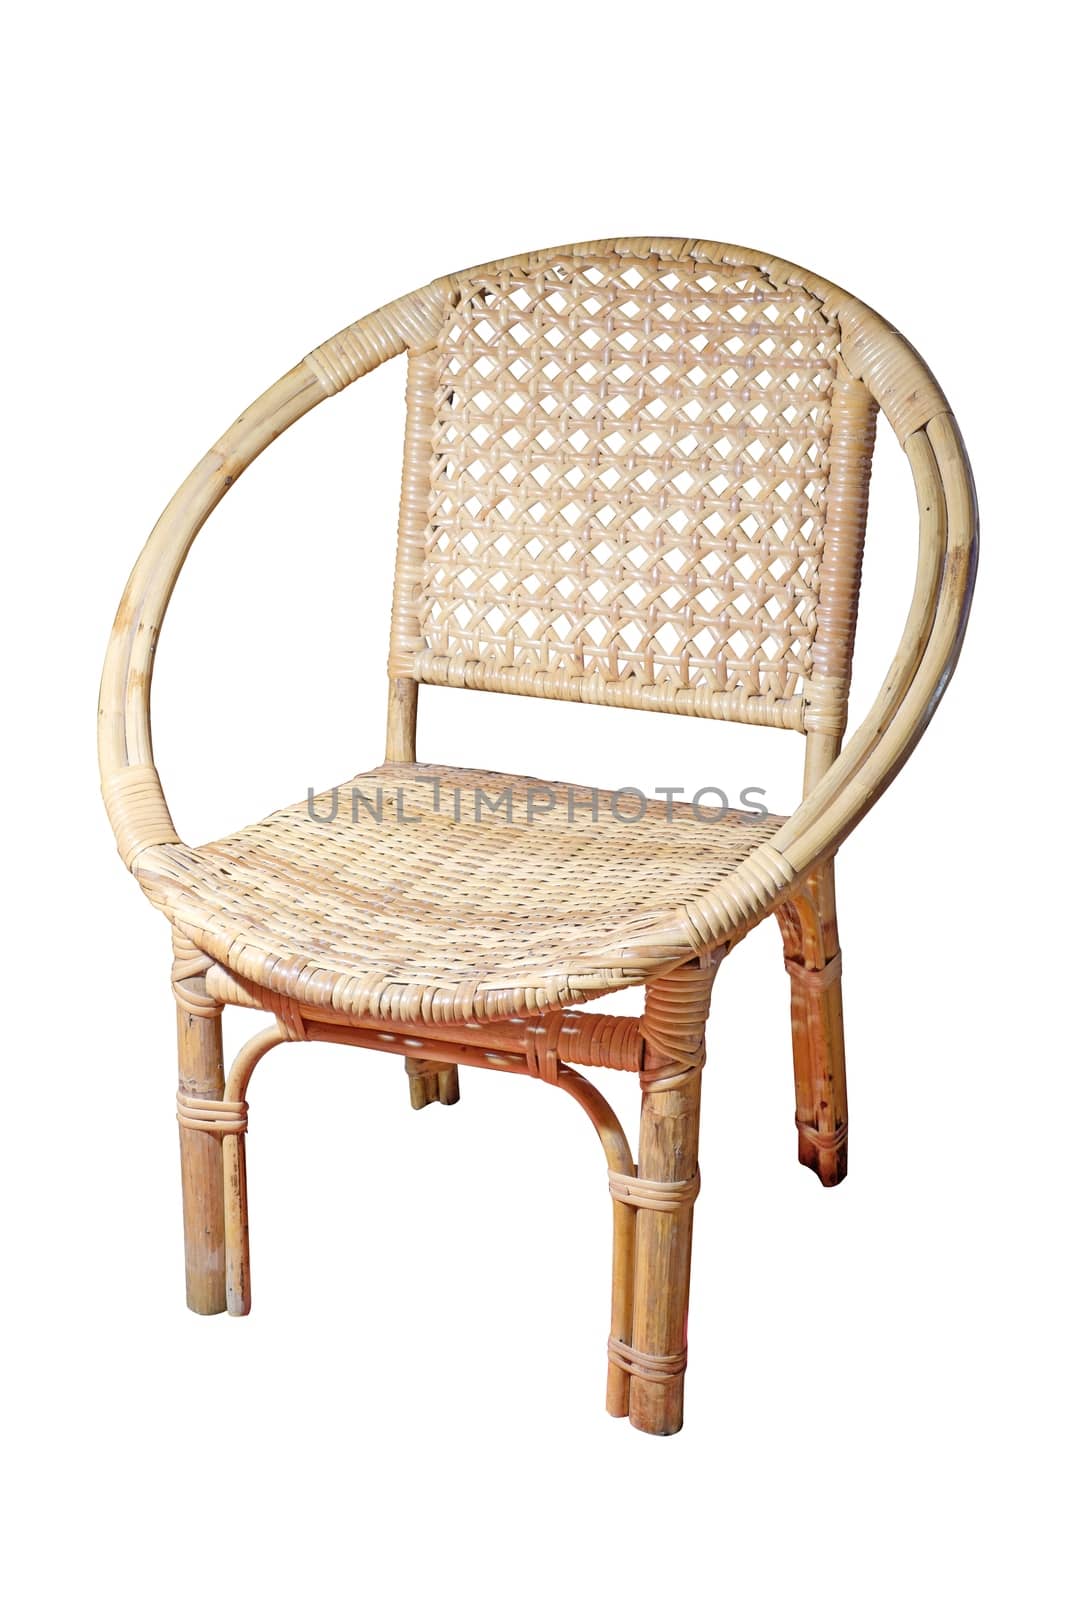 rattan chair isolate on white background by zneb076